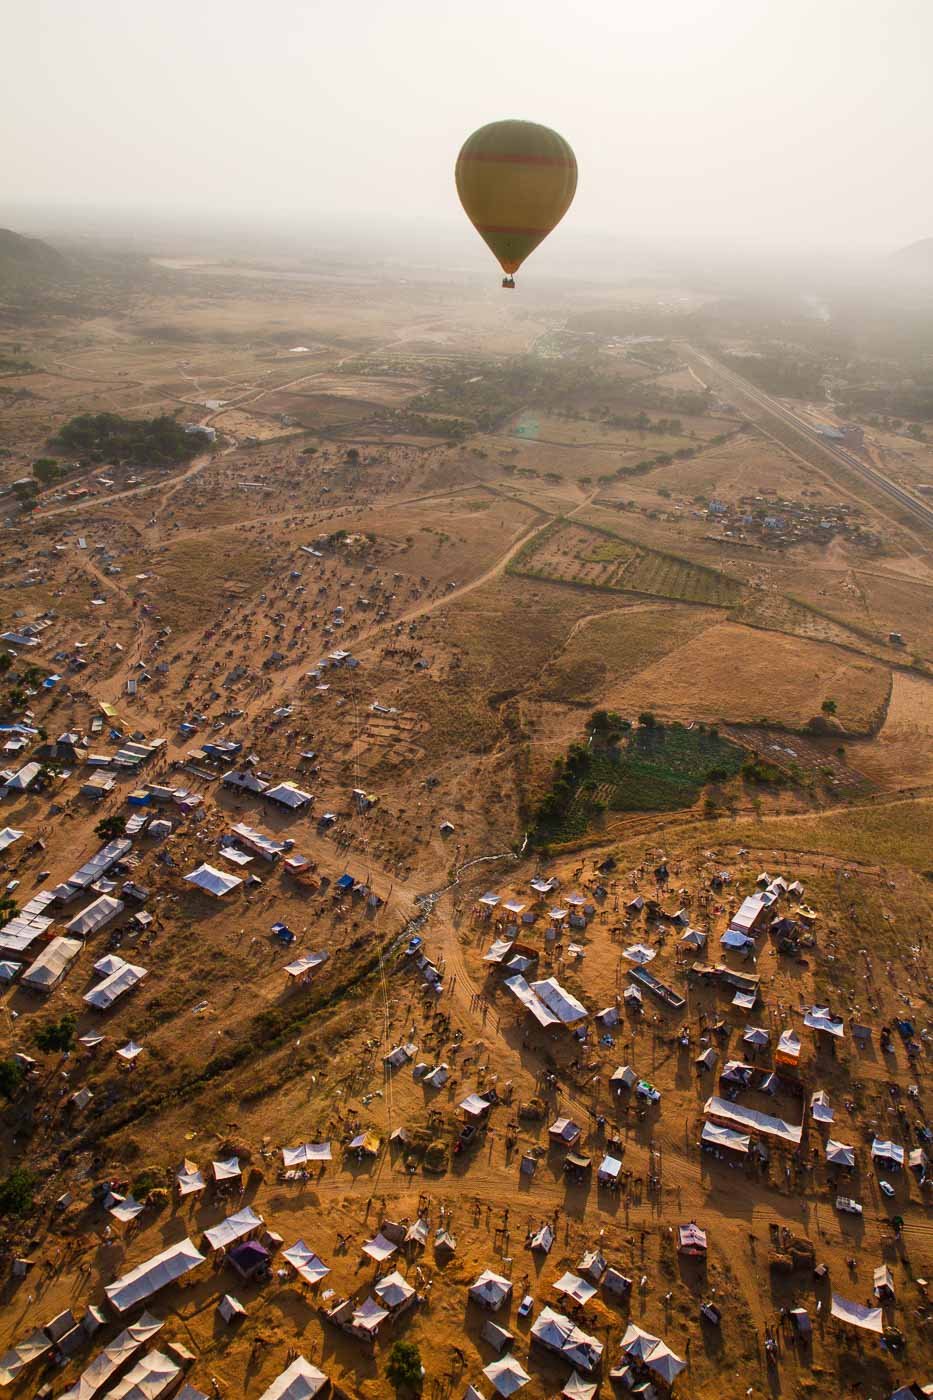 Floating silently over the Pushkar Camel Fair and its desert setting in a hot air balloon.